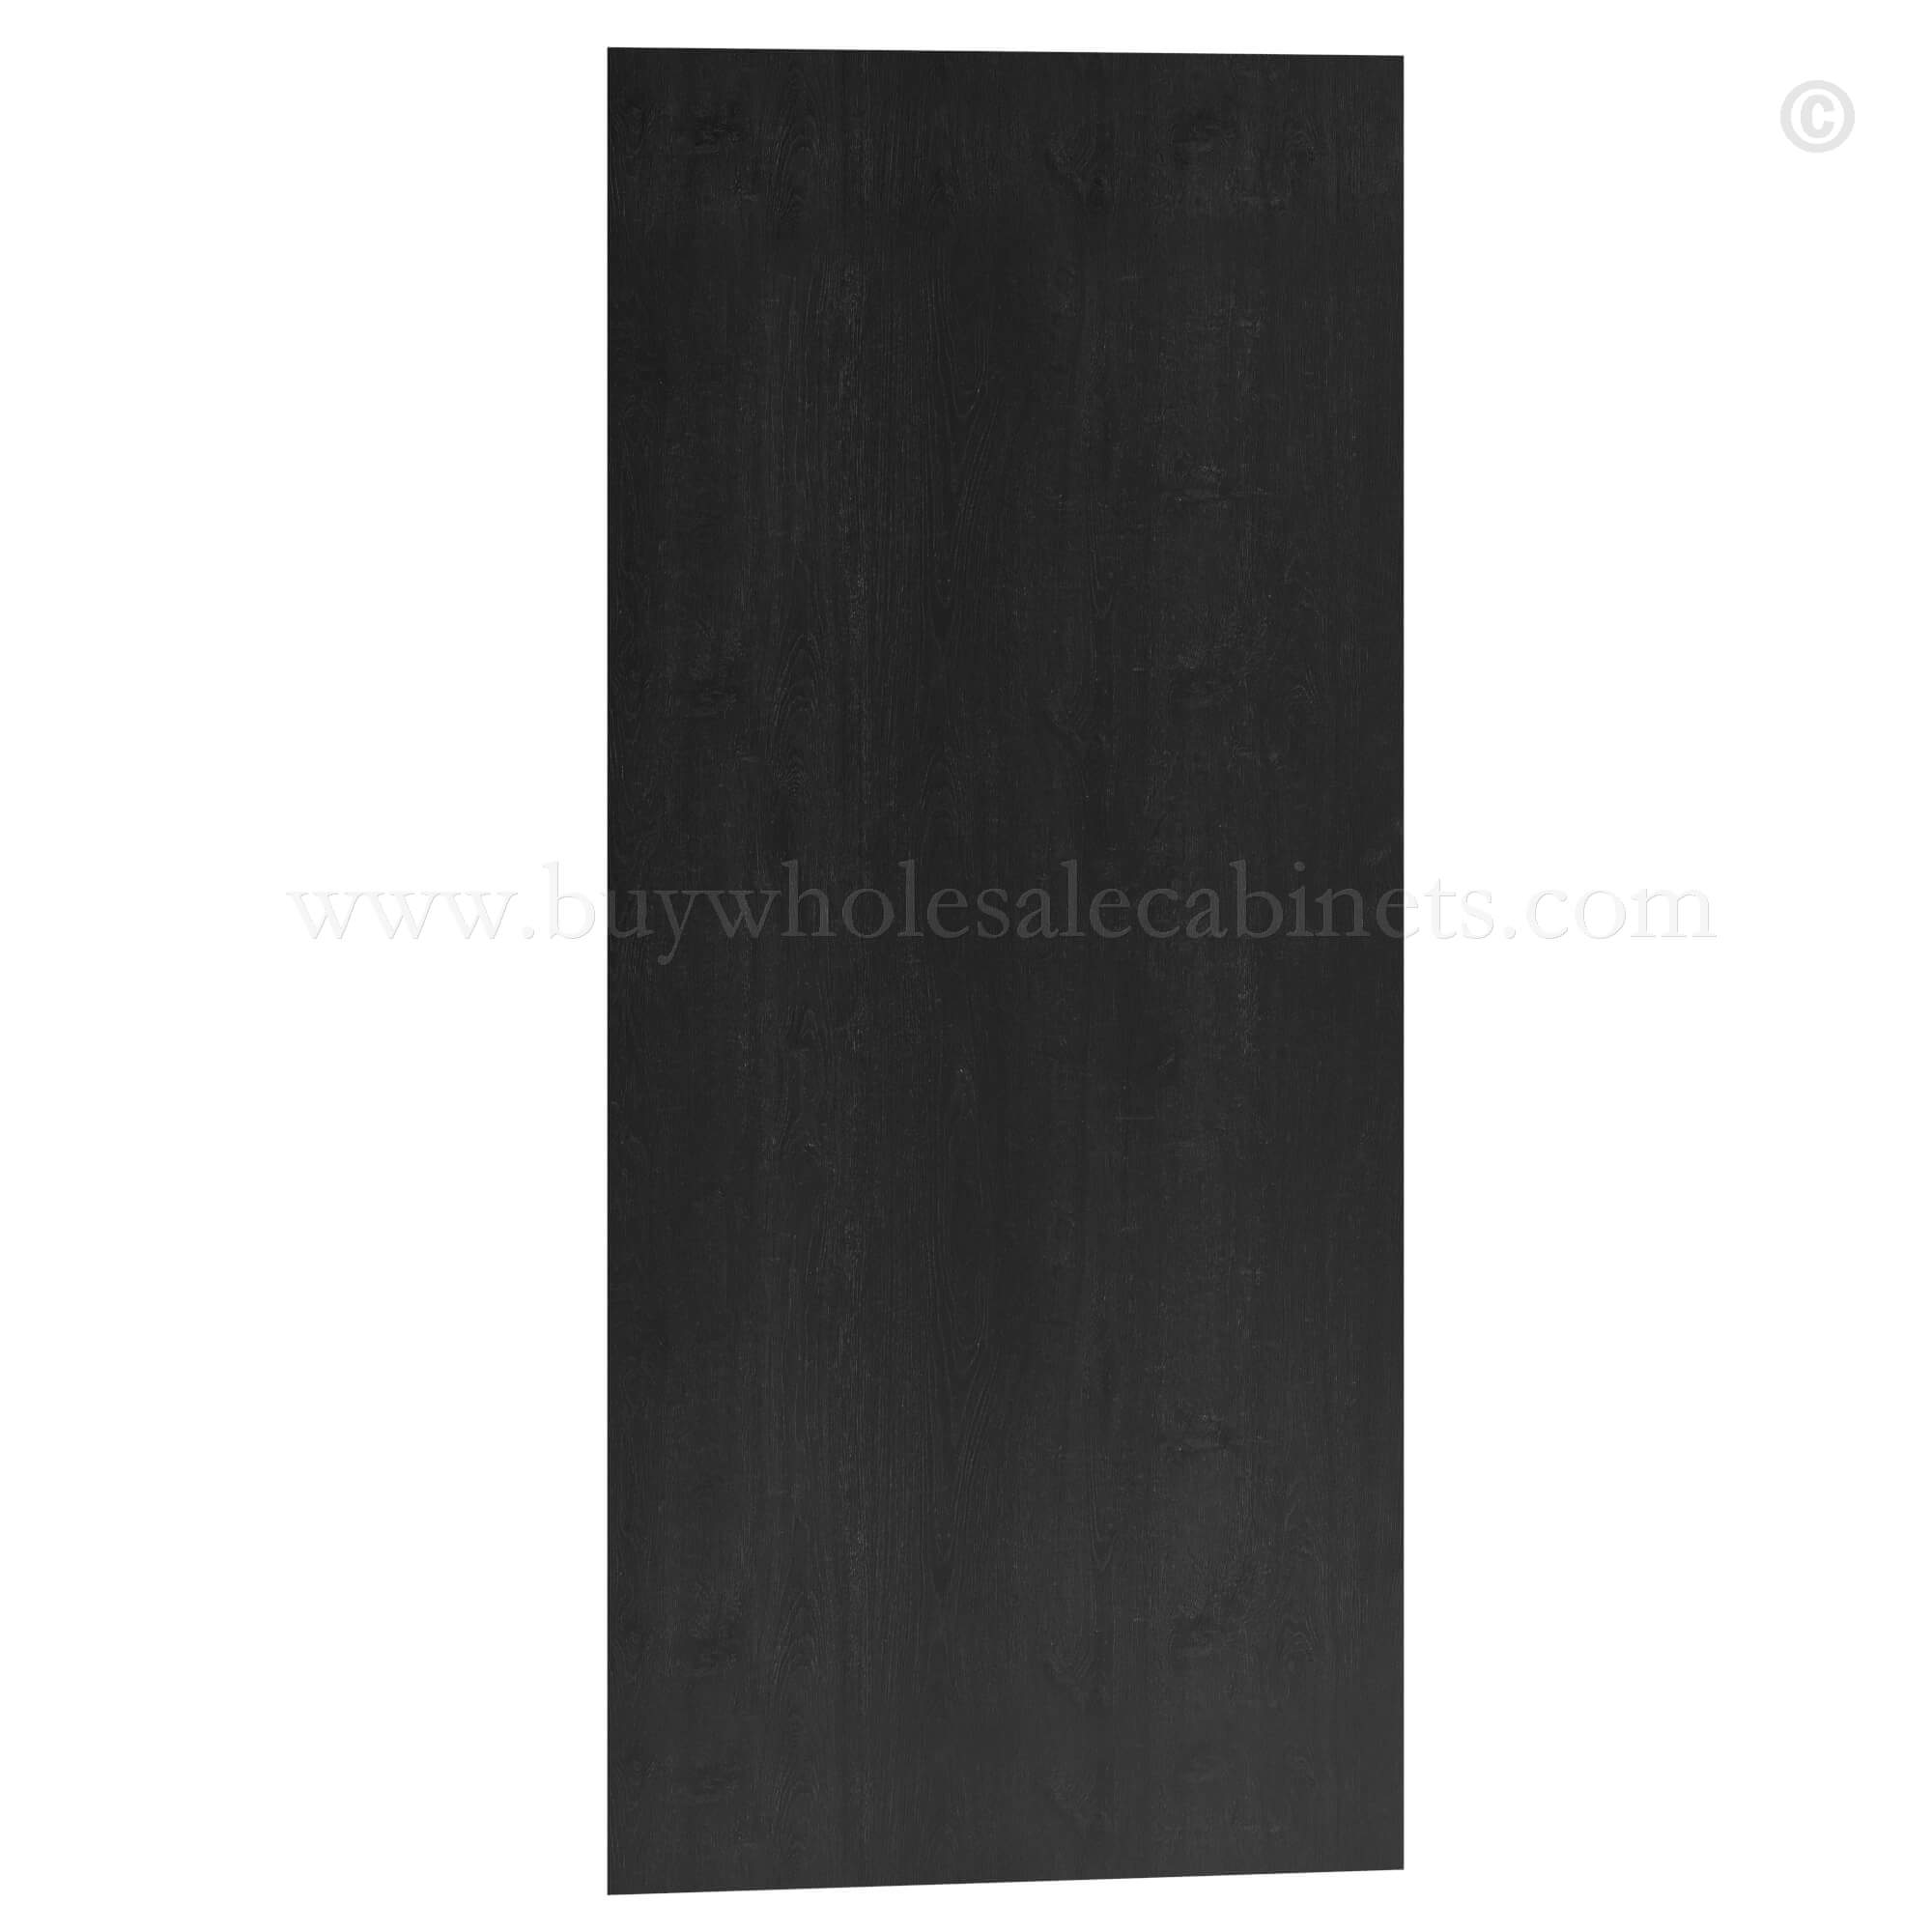 Charcoal Black Shaker Cabinet Panel, rta cabinets, wholesale cabinets